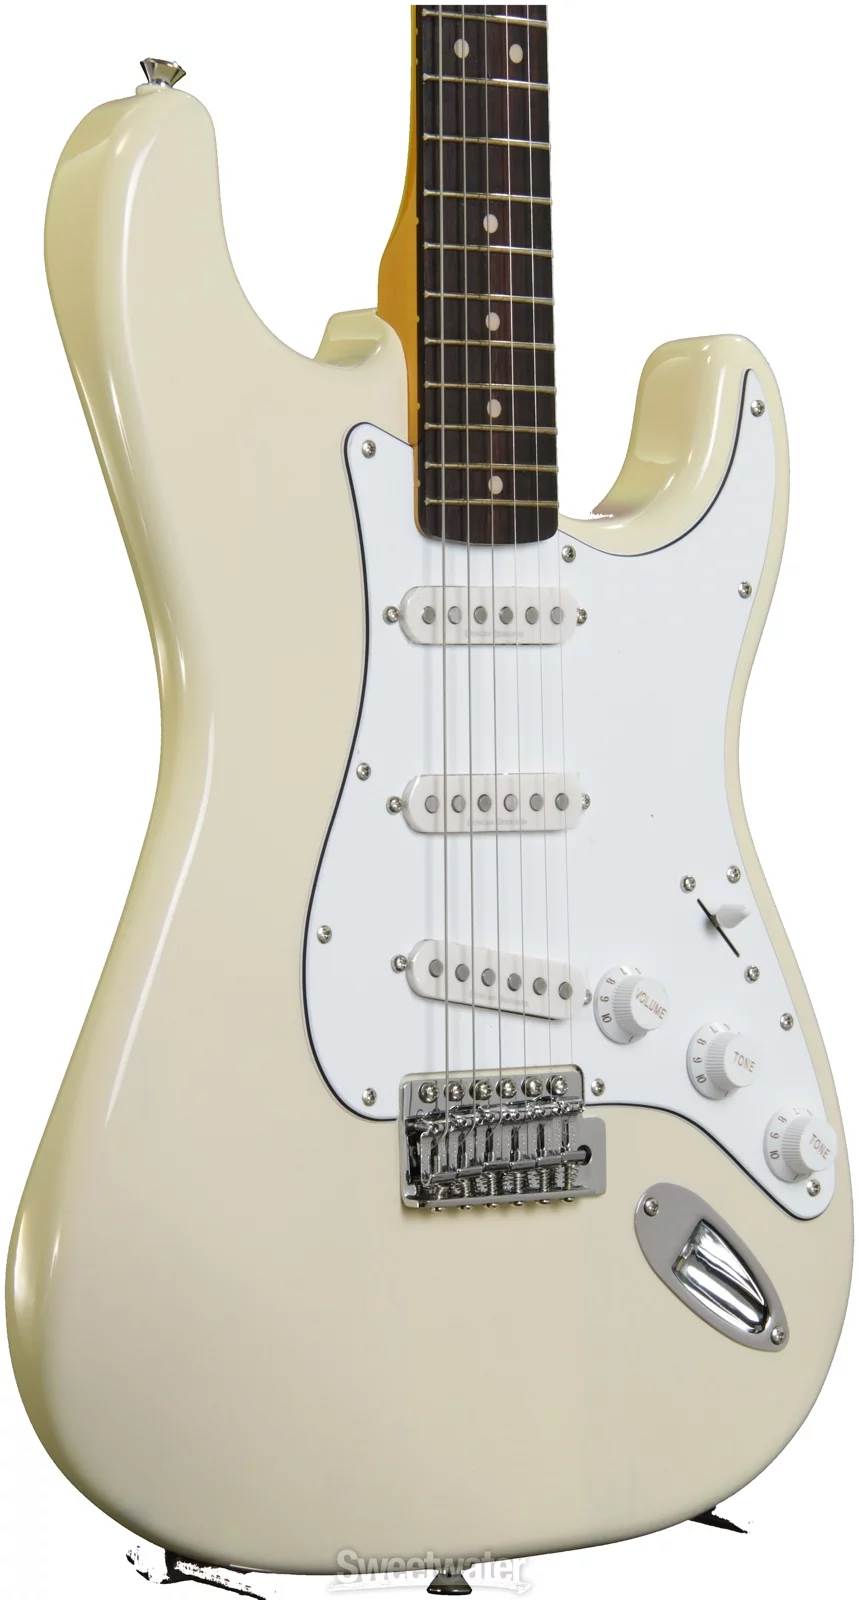 Vintage Modified Stratocaster, Second Series - FUZZFACED